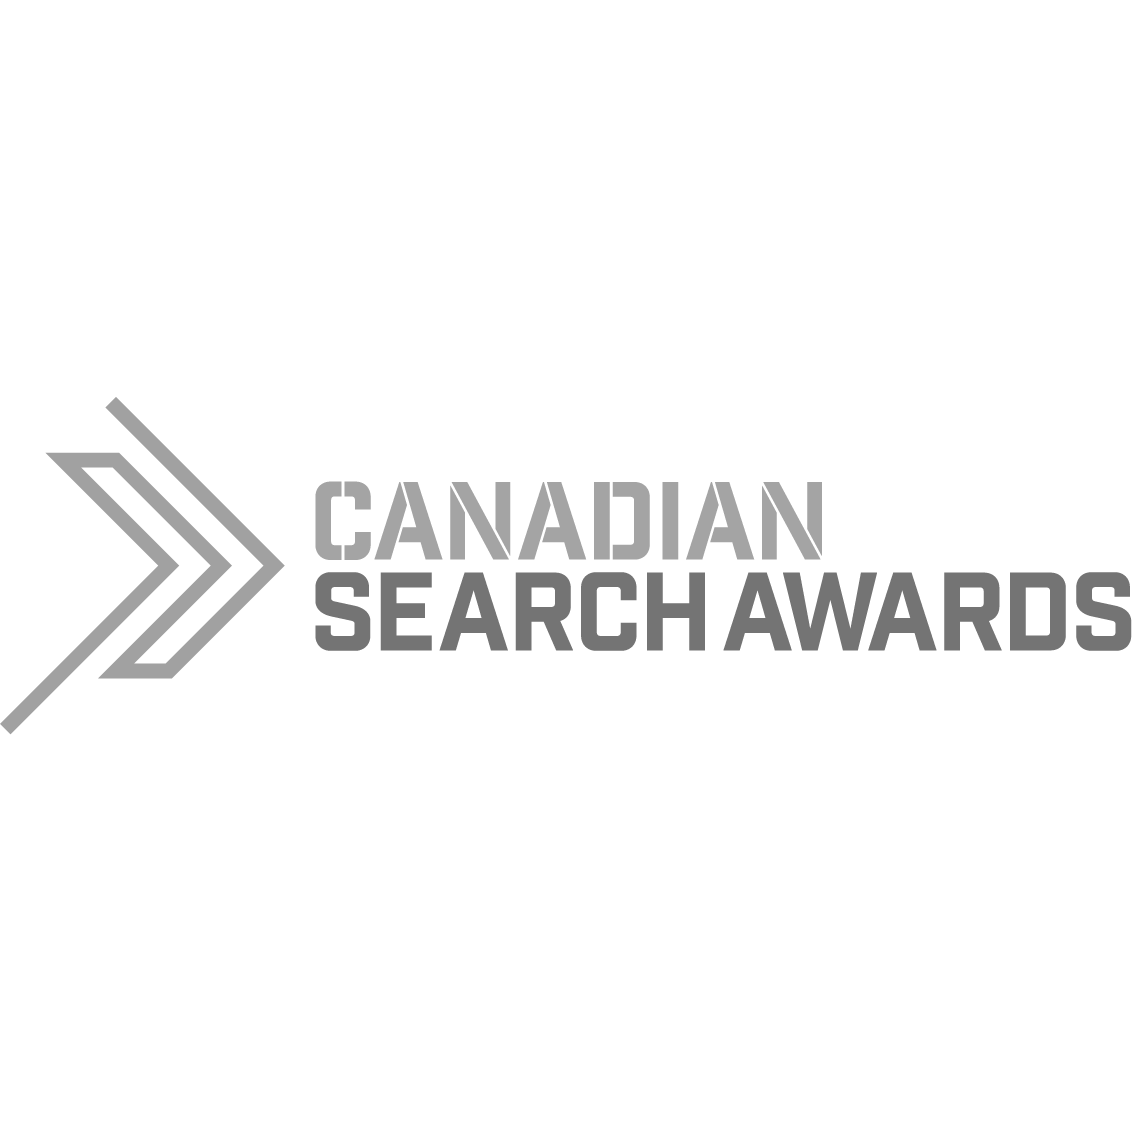 Canadian Search Awards